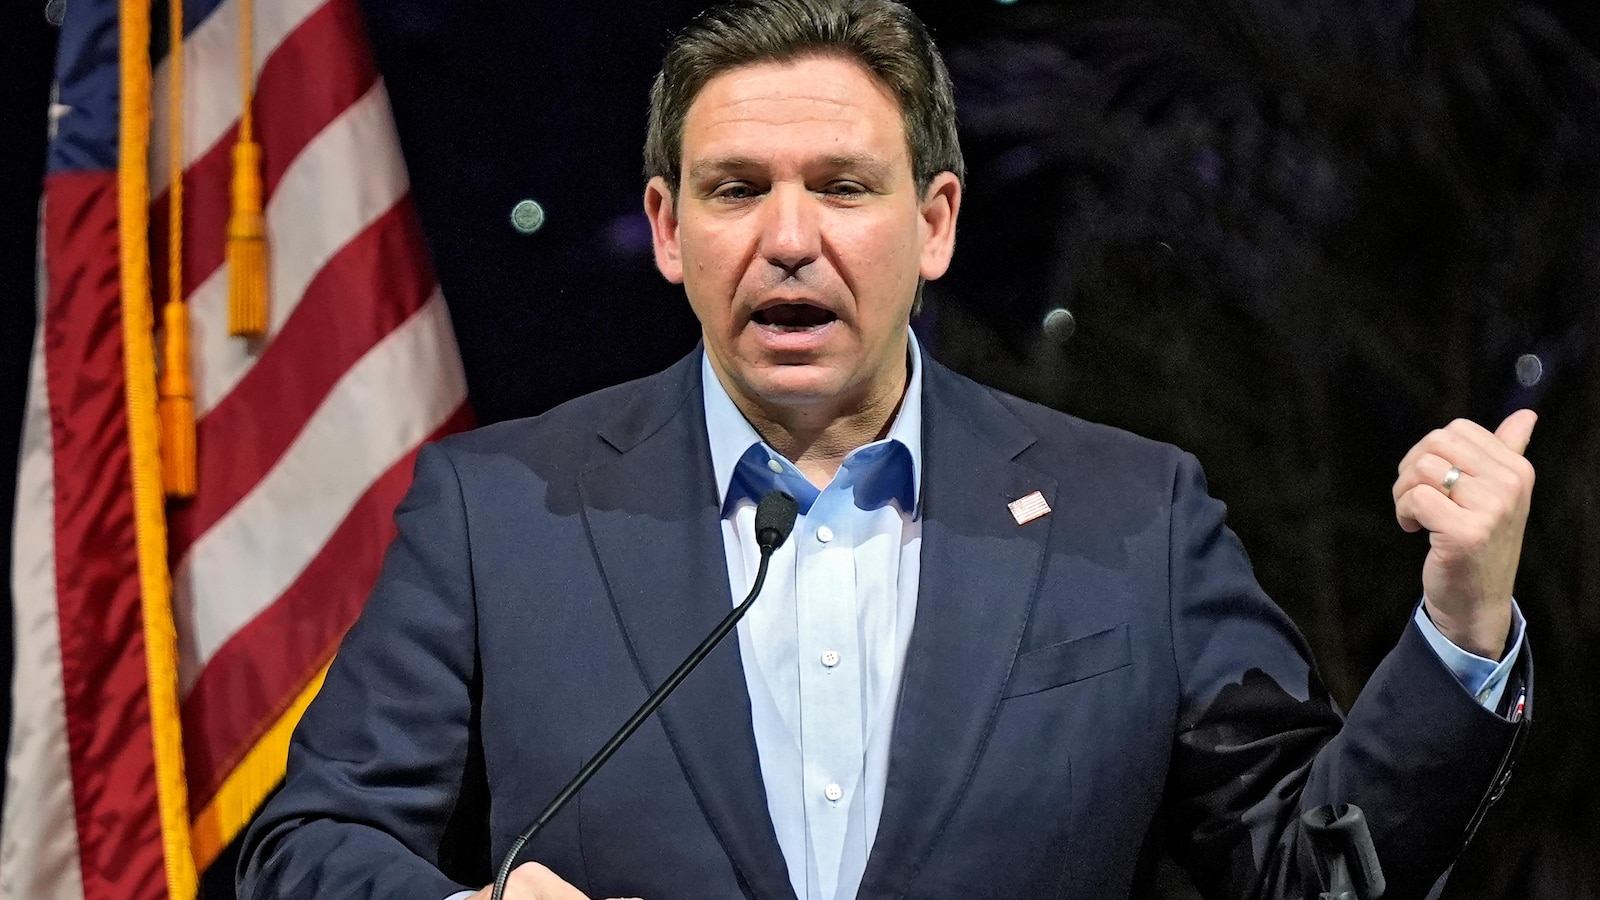 DeSantis, amid criticism, signs Florida bill making climate change a lower state priority